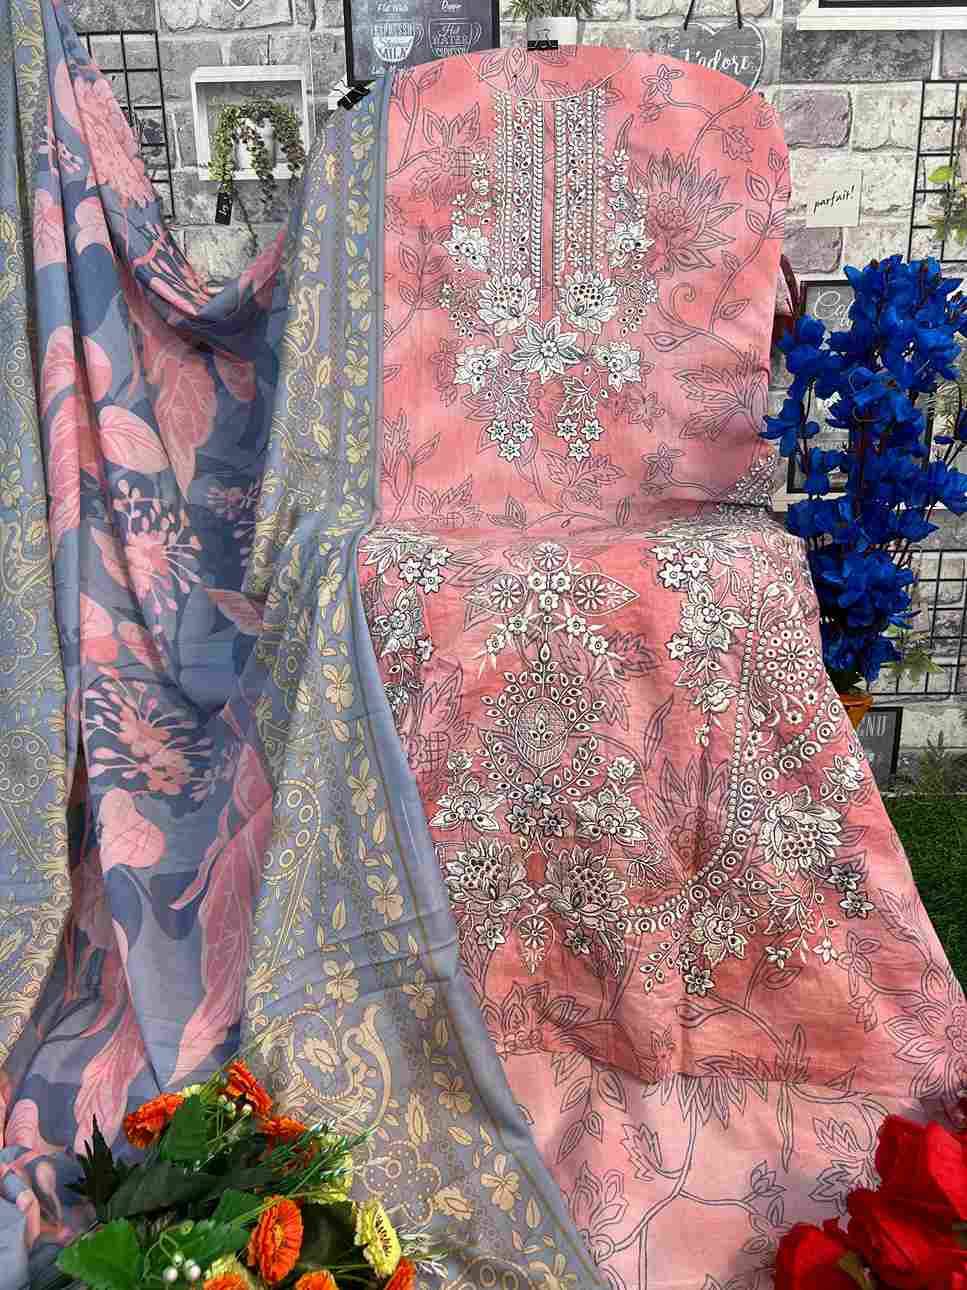 Charizma By Hazzel 1001 To 1006 Series Pakistani Suits Beautiful Fancy Colorful Stylish Party Wear & Occasional Wear Pure Lawn Cotton With Embroidery Dresses At Wholesale Price